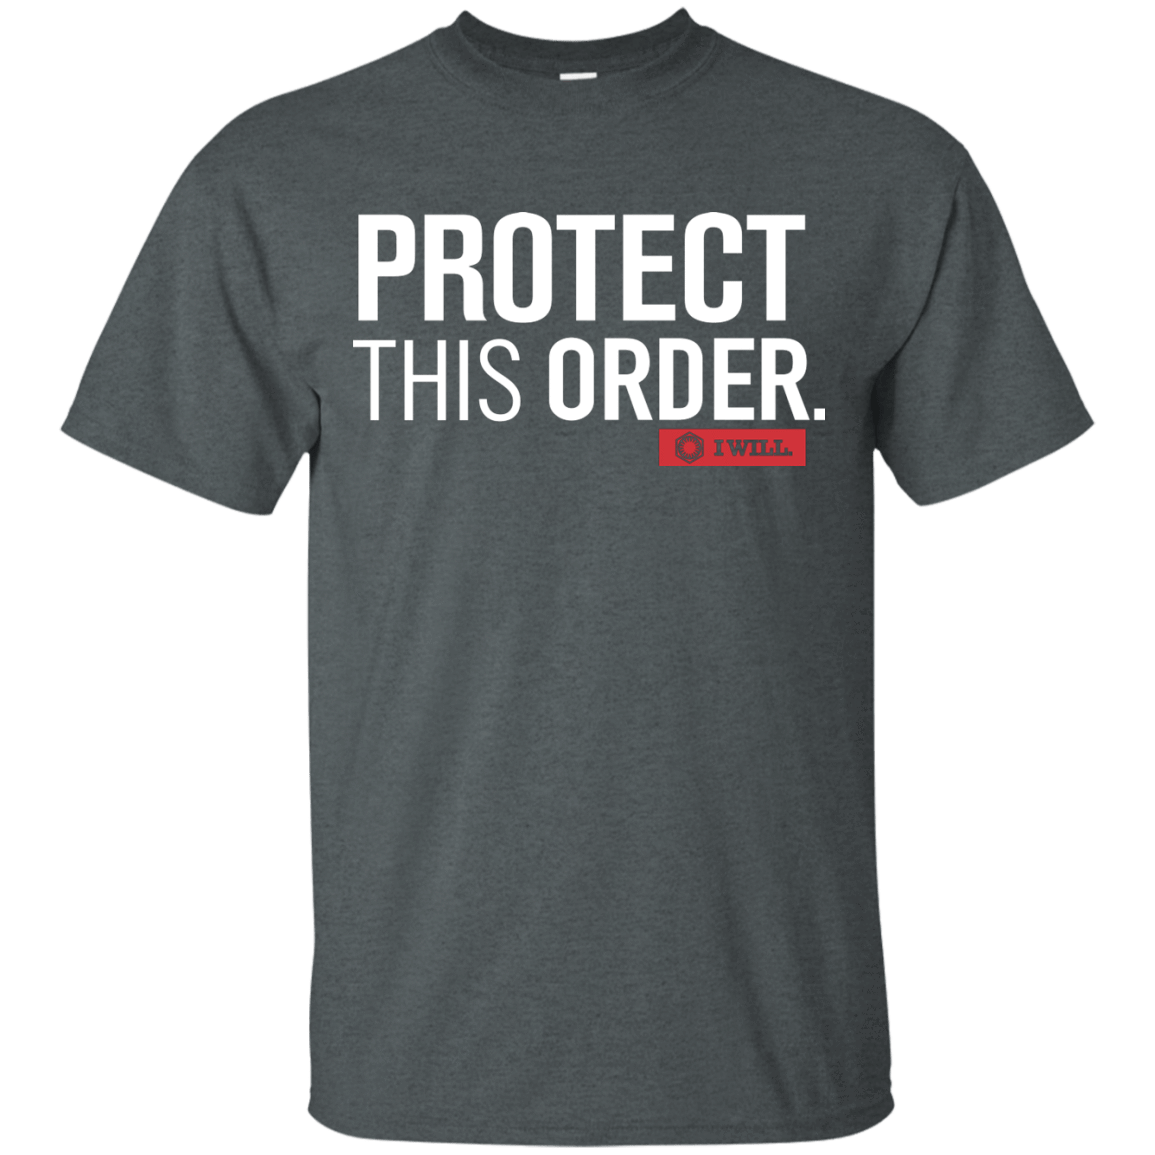 T-Shirts Dark Heather / Small Protect This Order T-Shirt